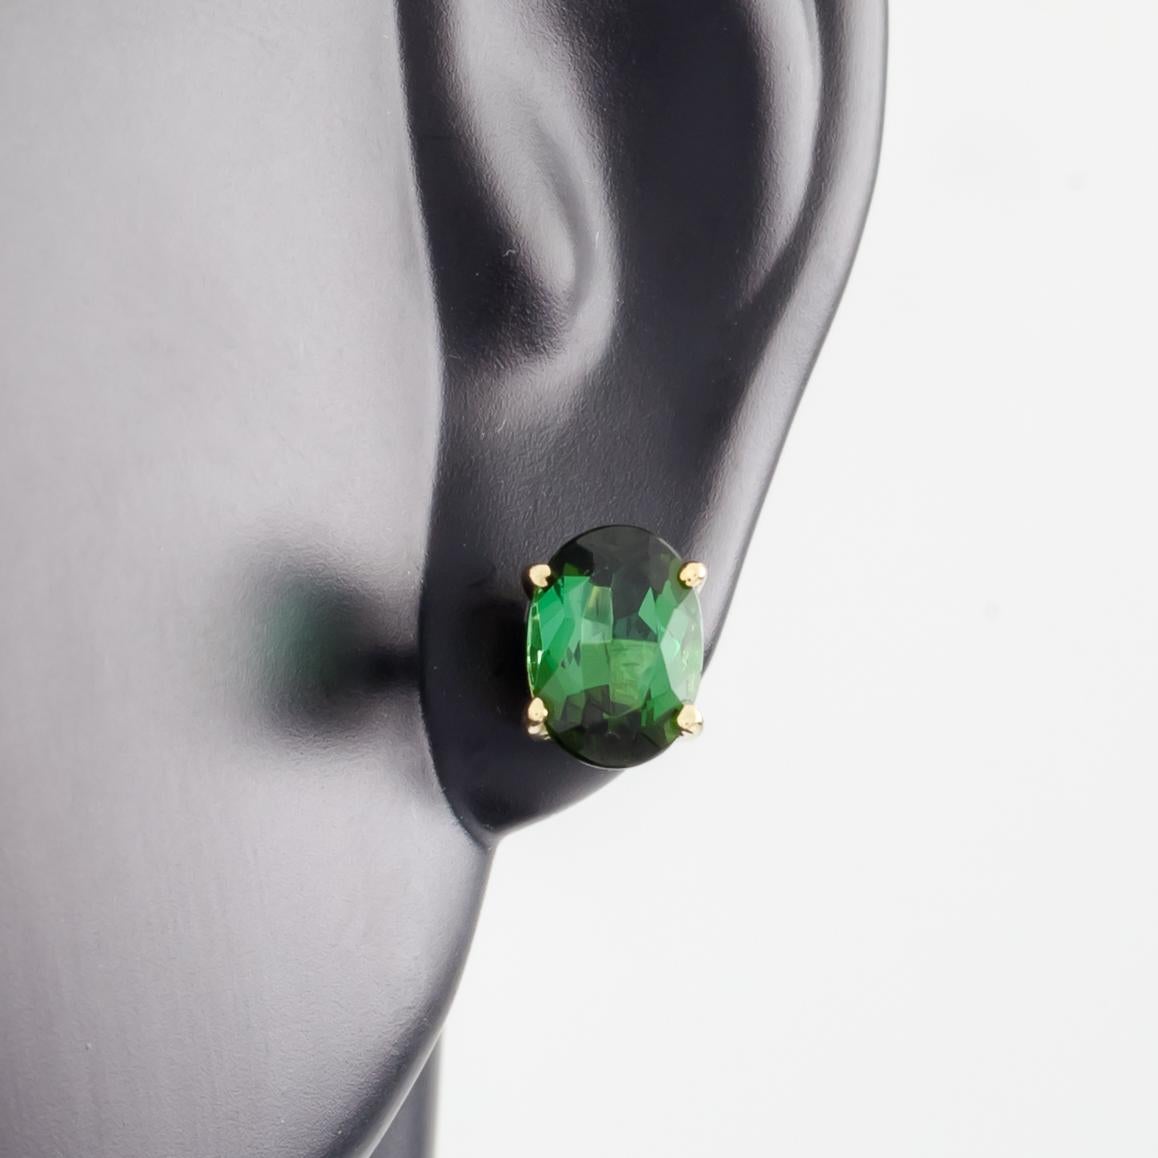 Gorgeous Oval Cut Tourmaline Stud Earrings
Feature Oval Cut Green Tourmalines in 12k Yellow Gold Prong Settings
Approximate Size of Tourmalines = 7 mm Long by 5 mm Wide
Include Butterfly Backs
Total Mass = 1.81 grams
Great Gift!